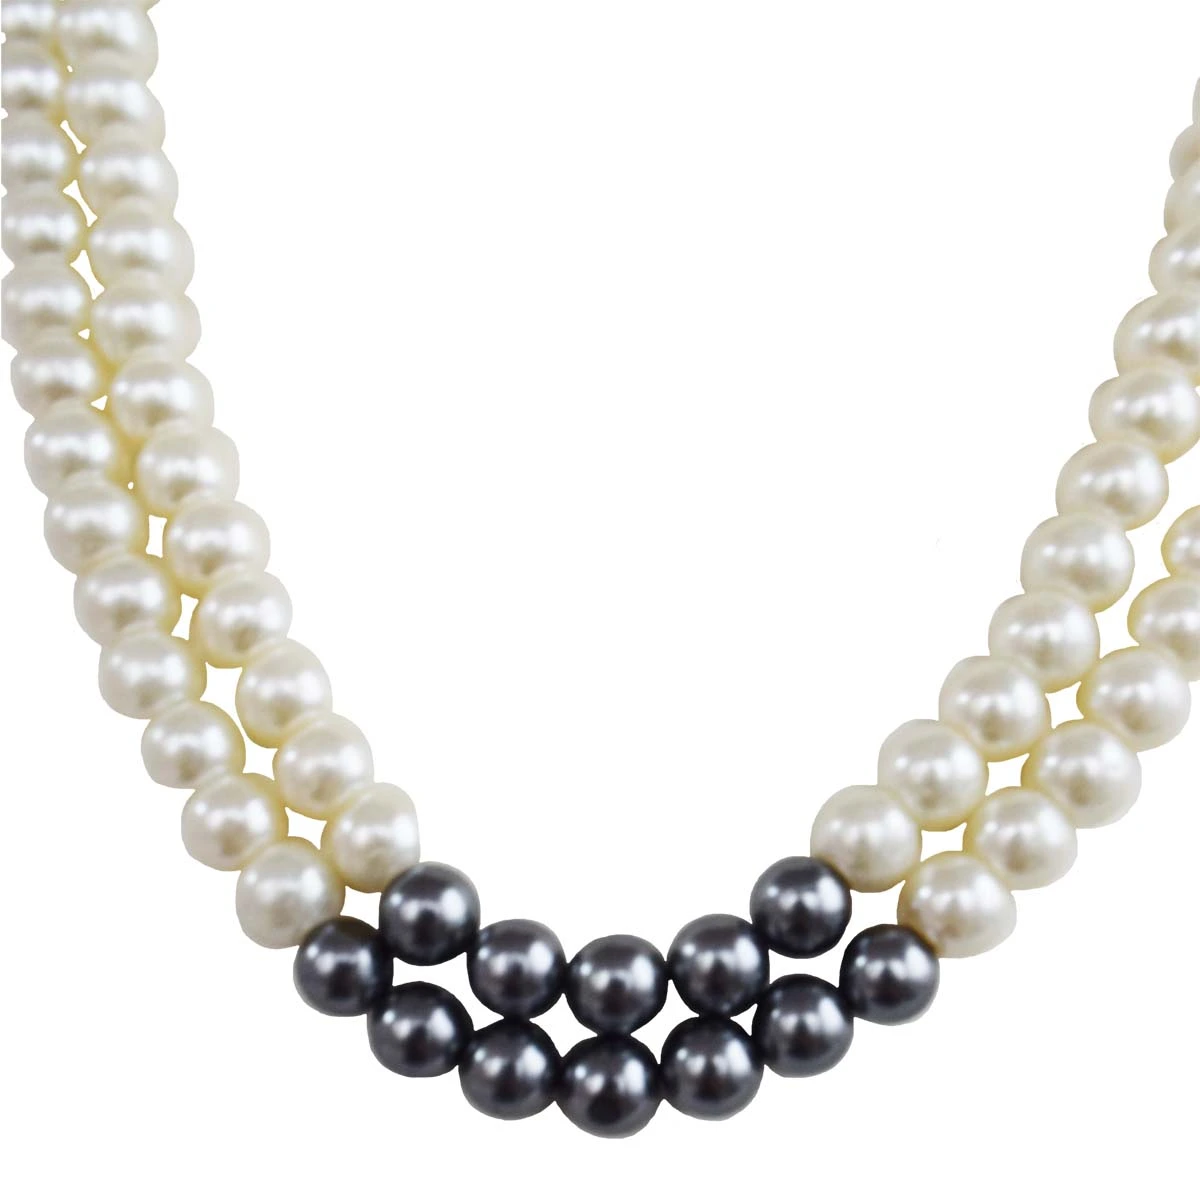 2 Line White & Gray Shell Pearl Necklace for Women (PS577)